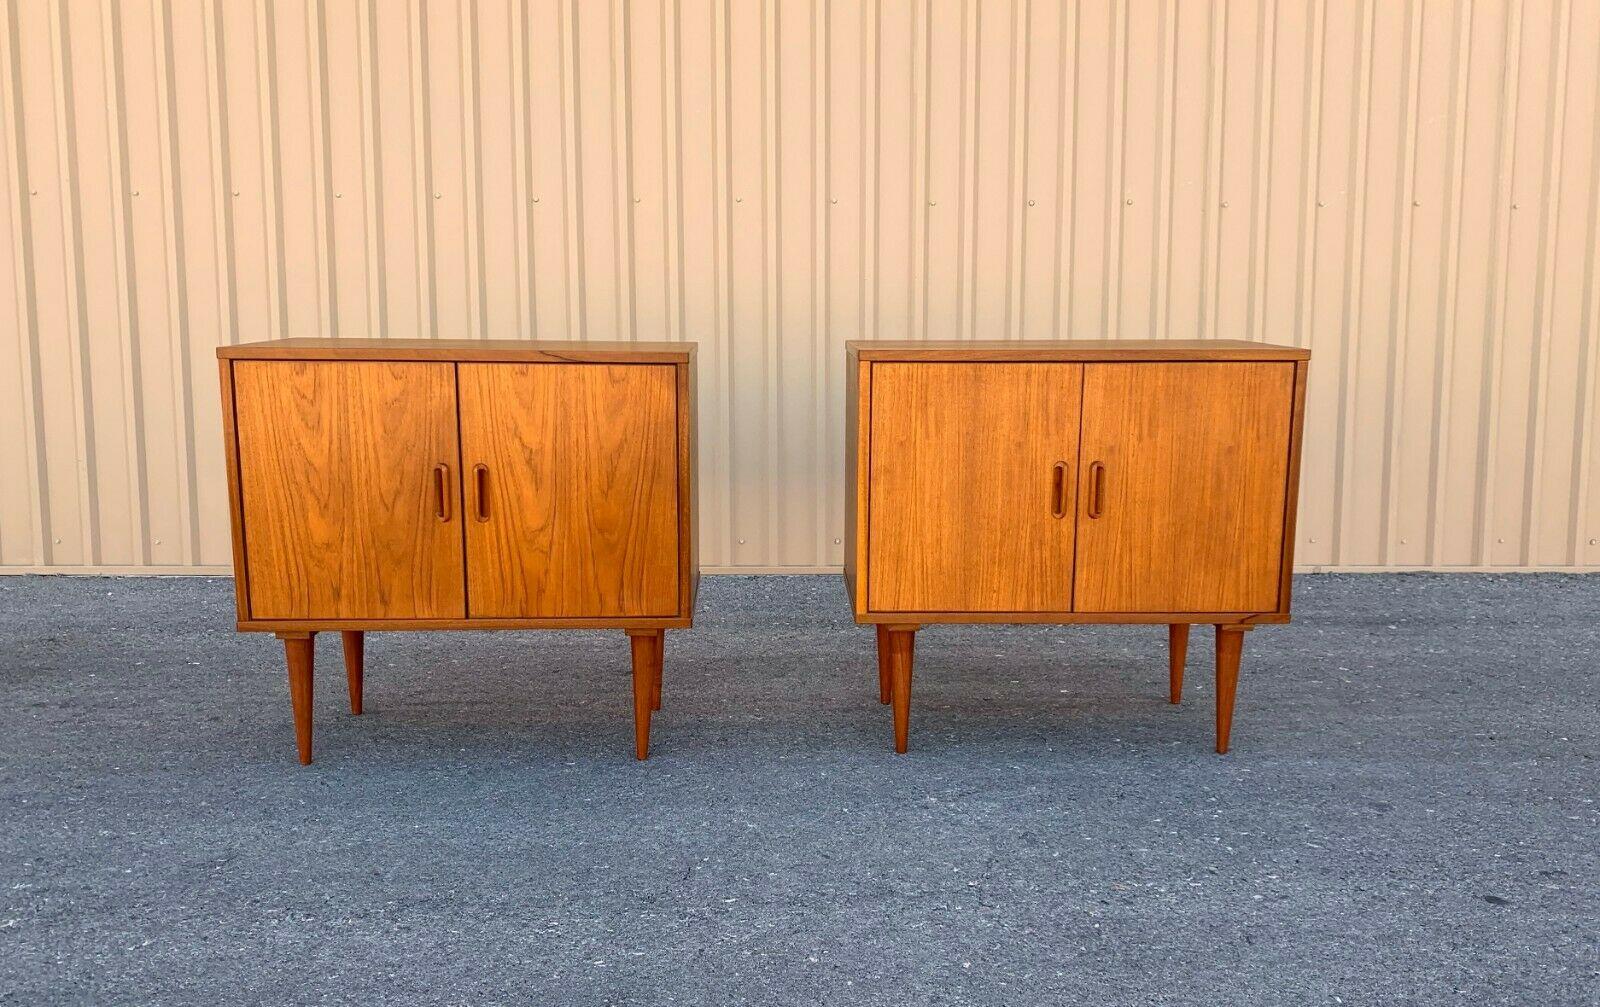 Very nice Danish Modern cabinet by Regner Christensen
Adjustable shelf. Removable legs for easy moving. 
vintage condition see pictures for details please note side has ware

Measures: 32 Wide x 16 1/2 x Deep x 30 .75 High.




